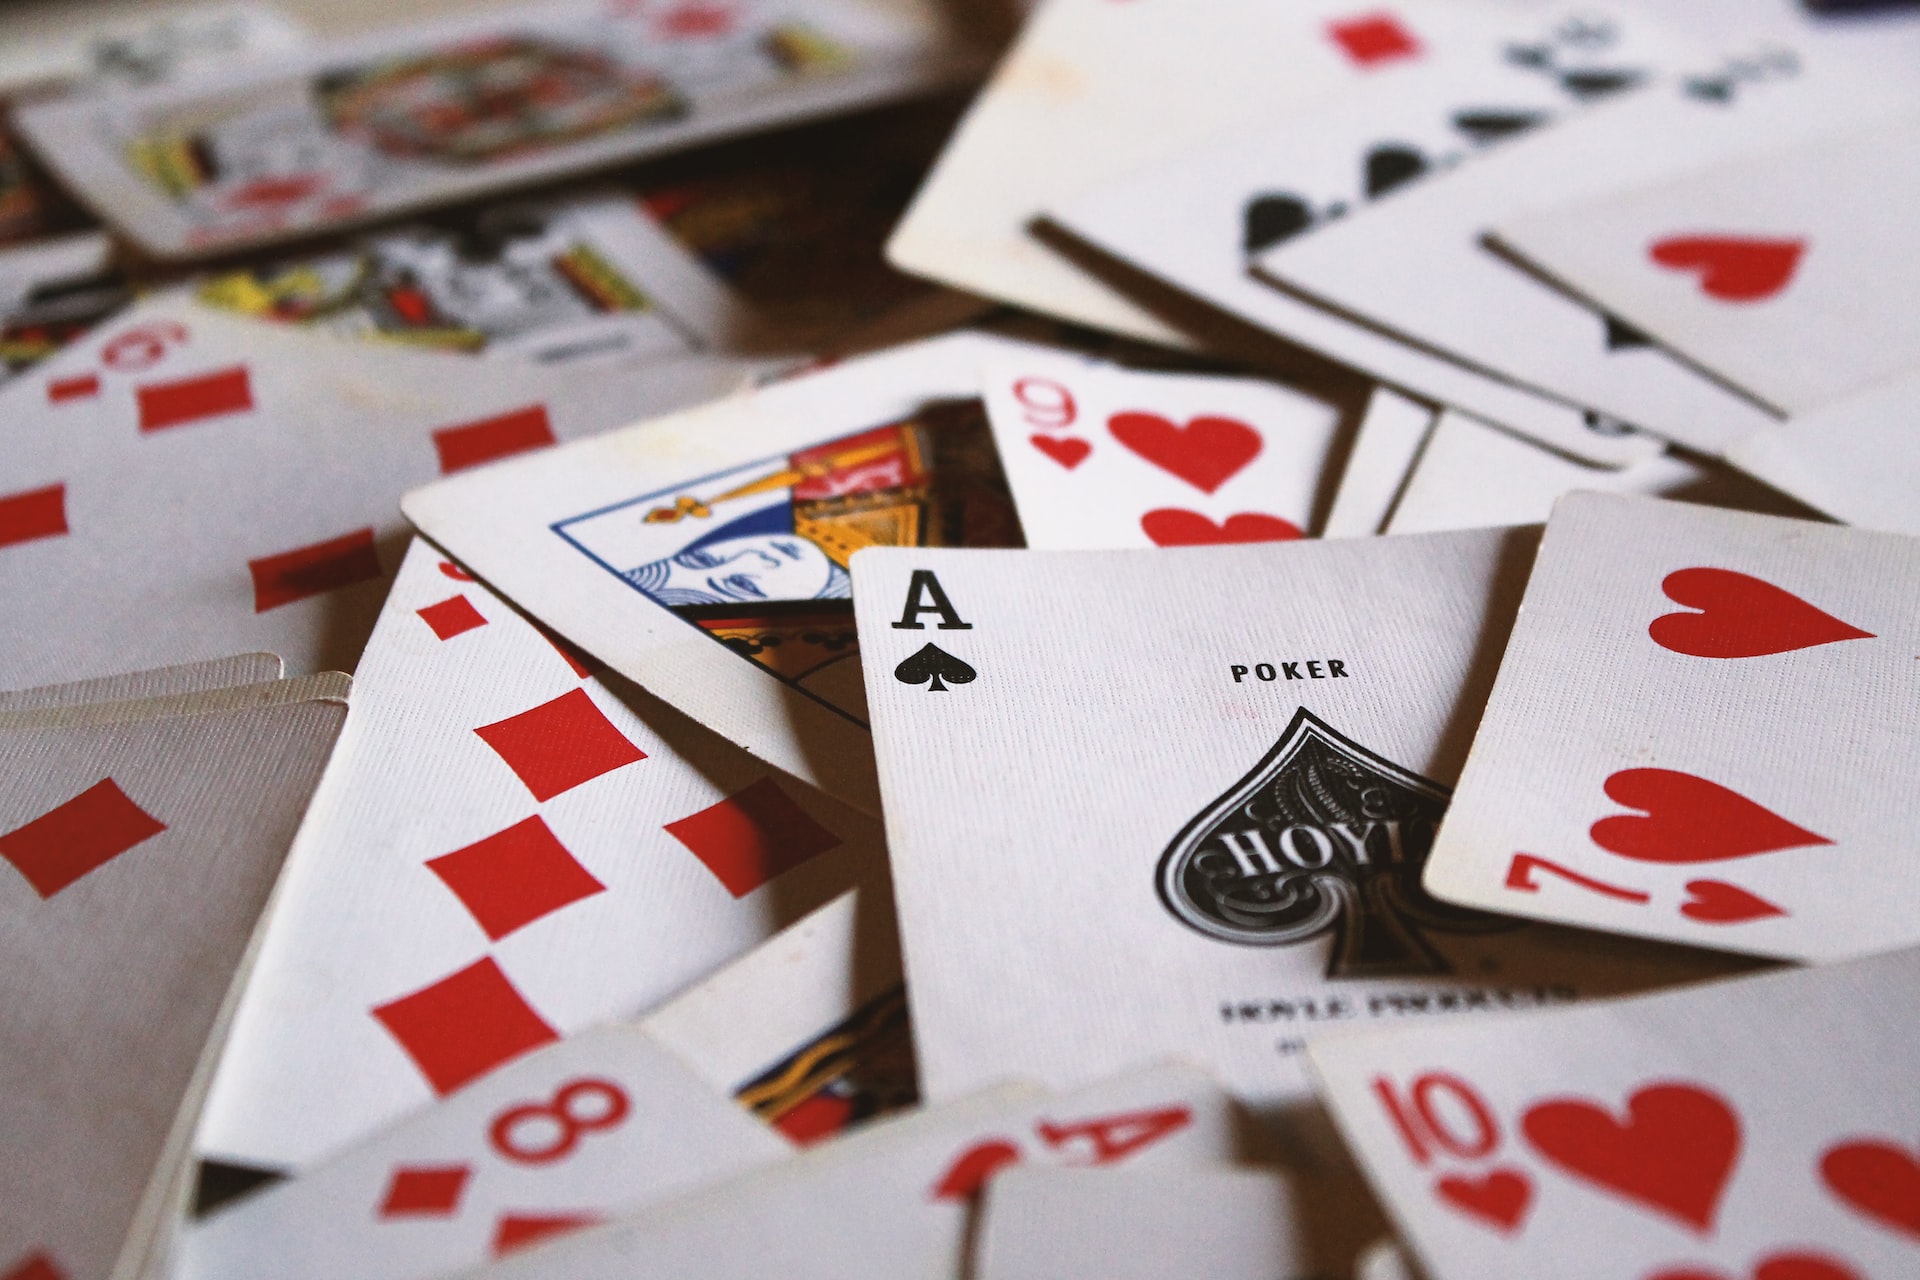 Top tips and tricks to play the game of Rummy